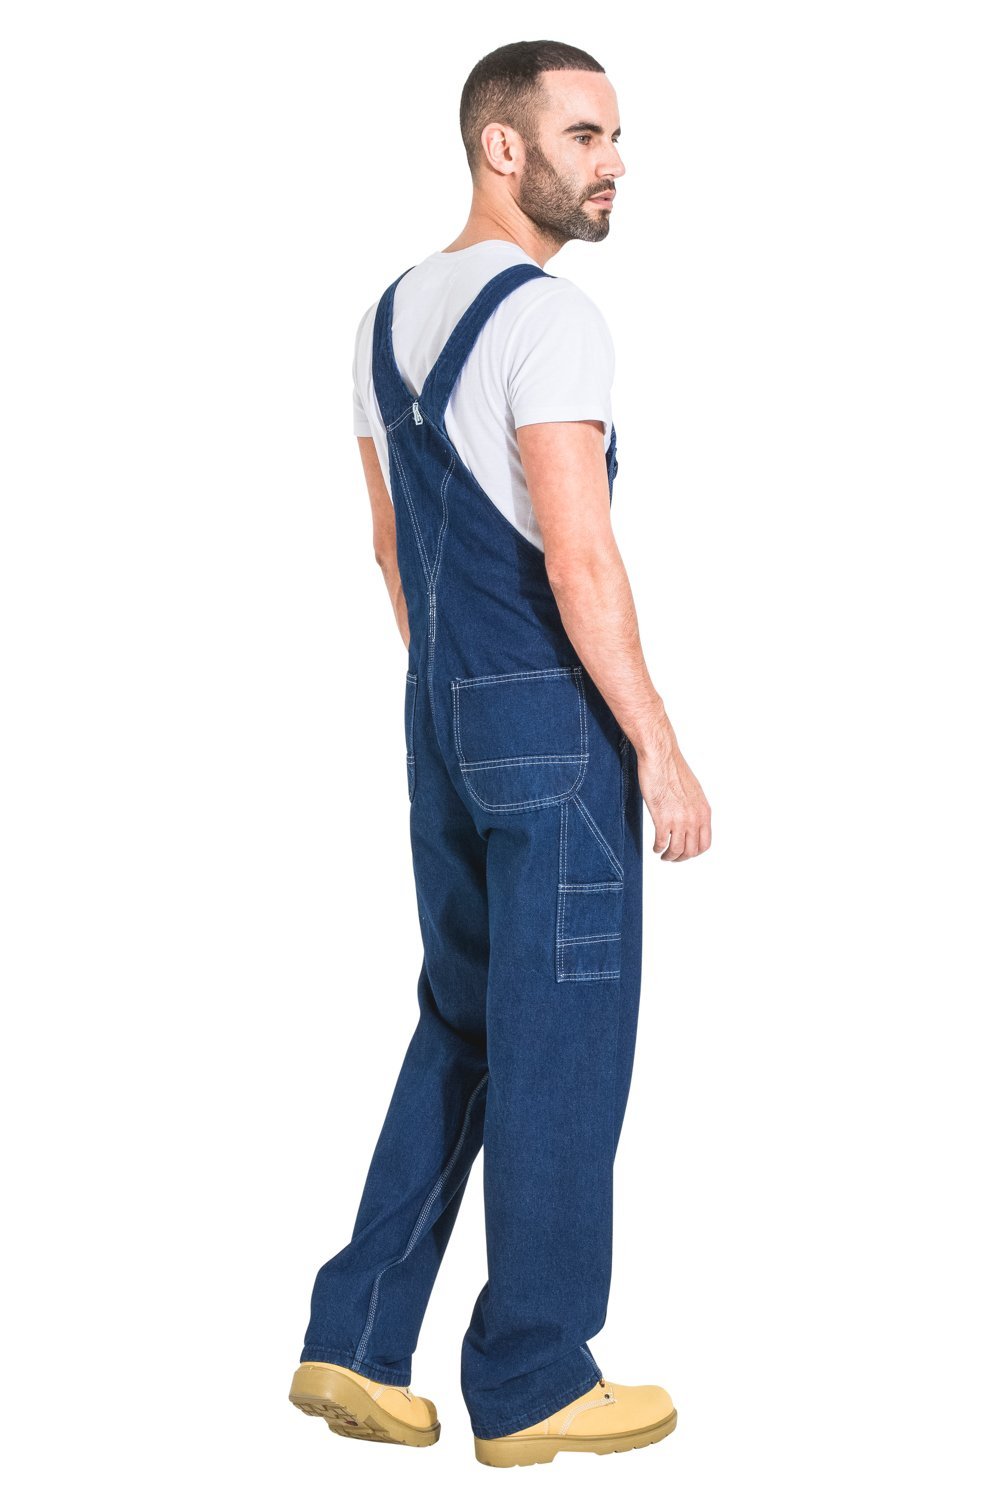 Full-length side view wearing premium work bib-overall showing back cross straps, rear and thigh pockets.